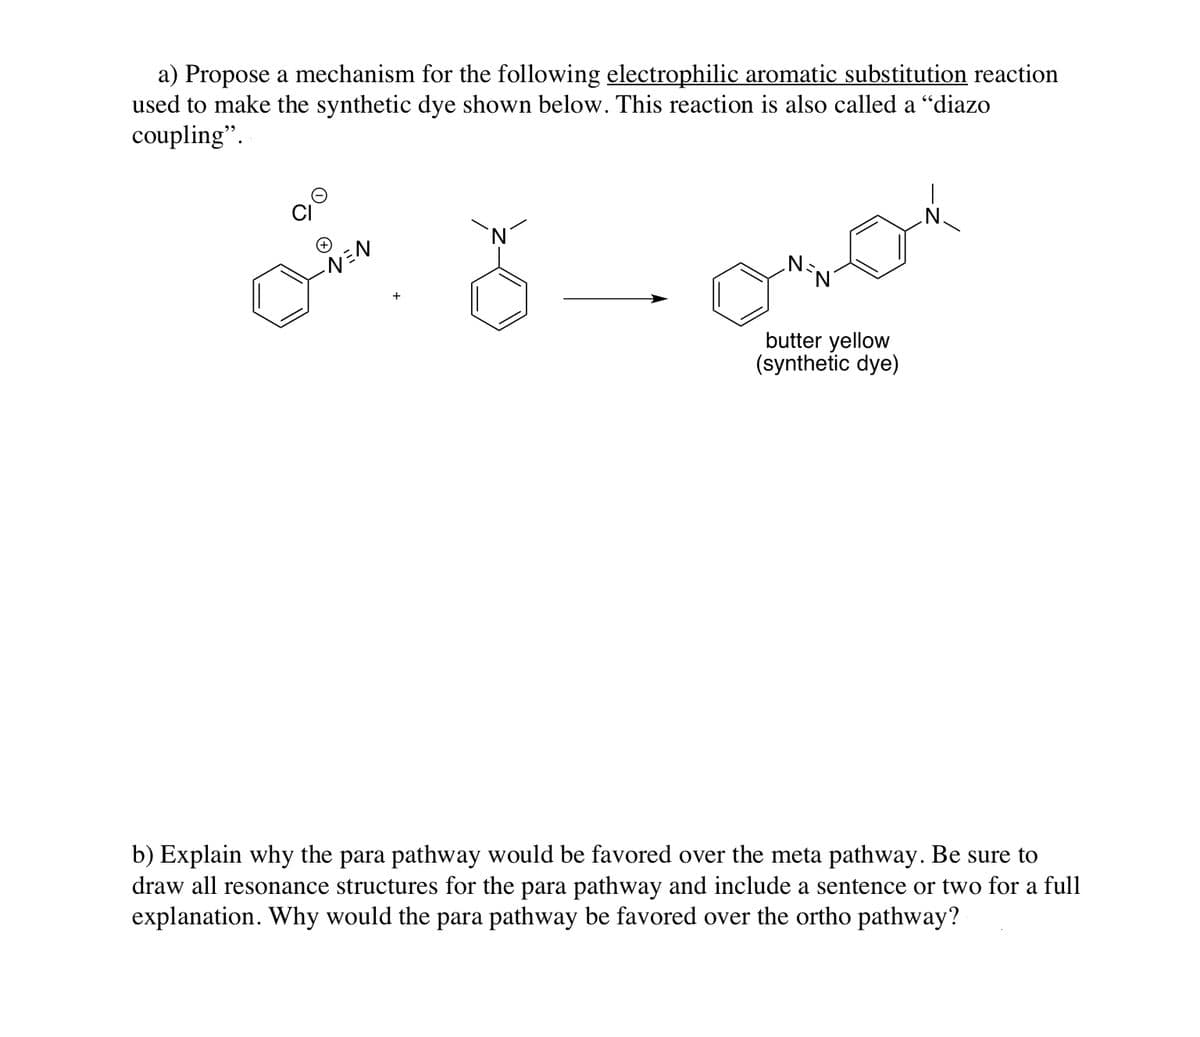 a) Propose a mechanism for the following electrophilic aromatic substitution reaction
used to make the synthetic dye shown below. This reaction is also called a "diazo
coupling".
`N,
butter yellow
(synthetic dye)
b) Explain why the para pathway would be favored over the meta pathway. Be sure to
draw all resonance structures for the para pathway and include a sentence or two for a full
explanation. Why would the para pathway be favored over the ortho pathway?
